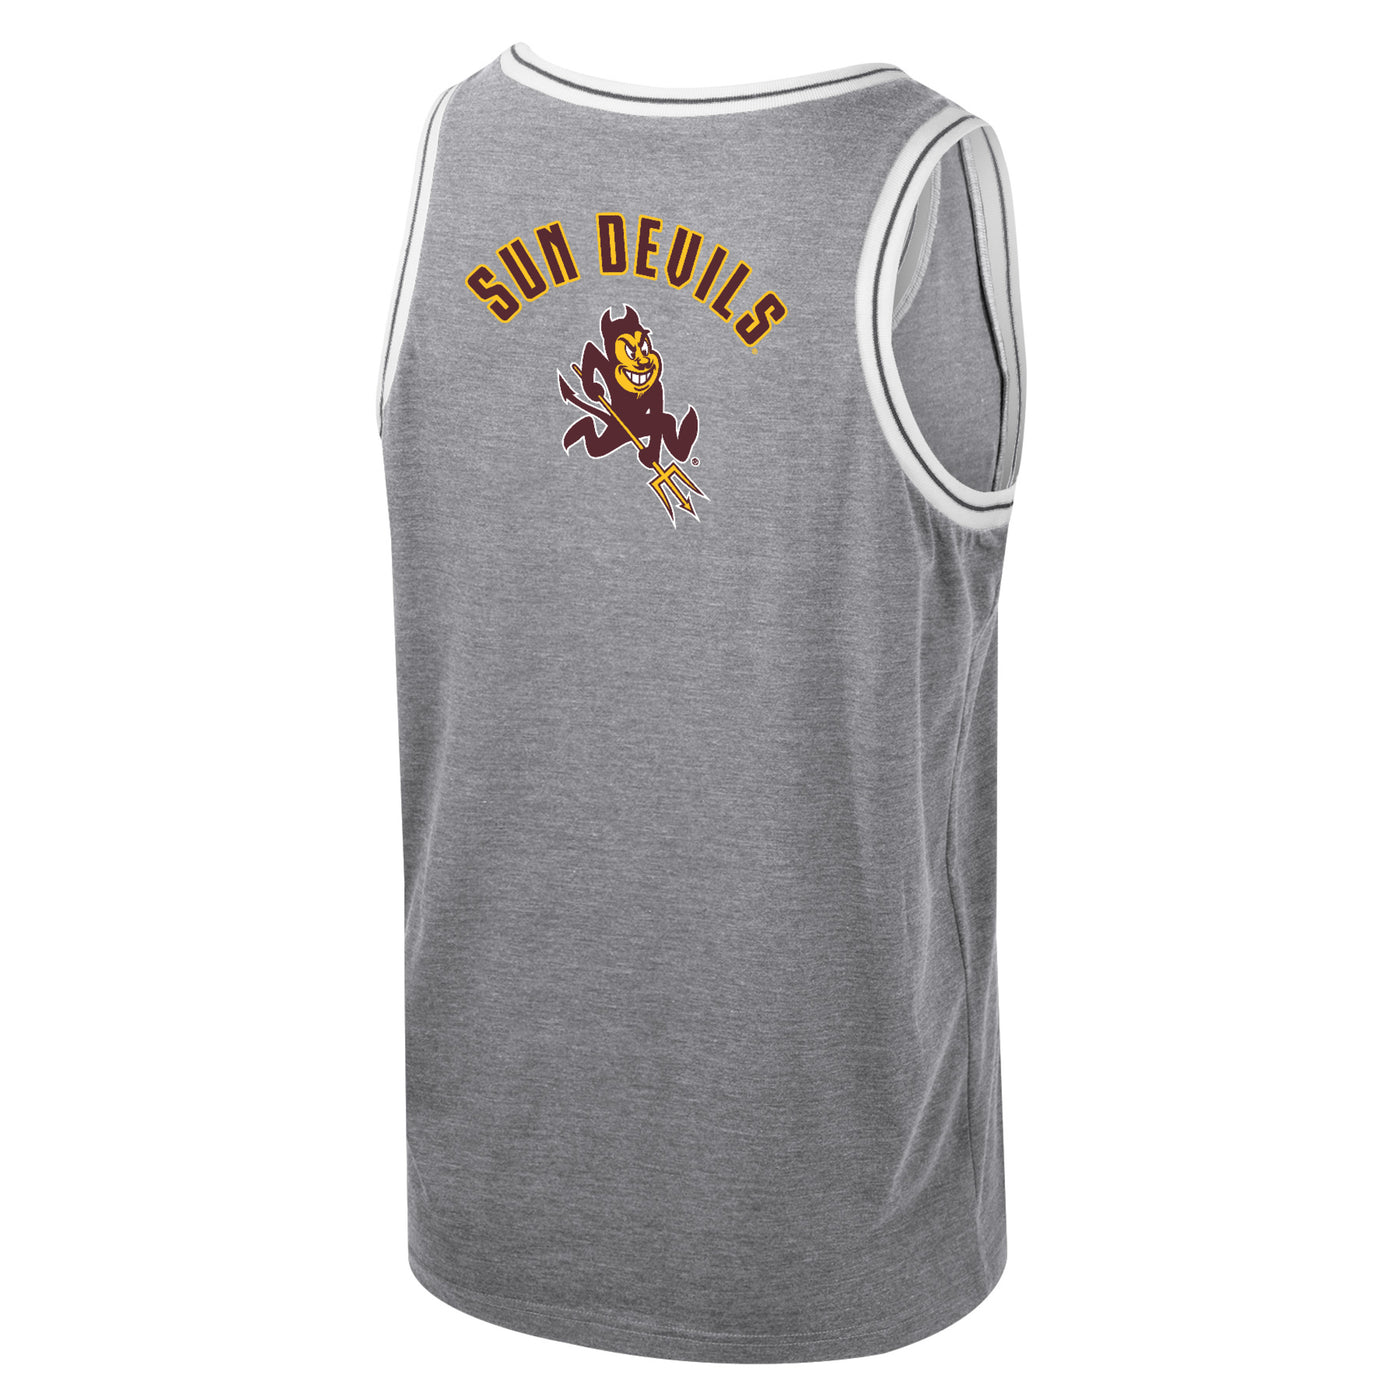 ASU grey mens tank top with white trim around arm and neck lines. the text 